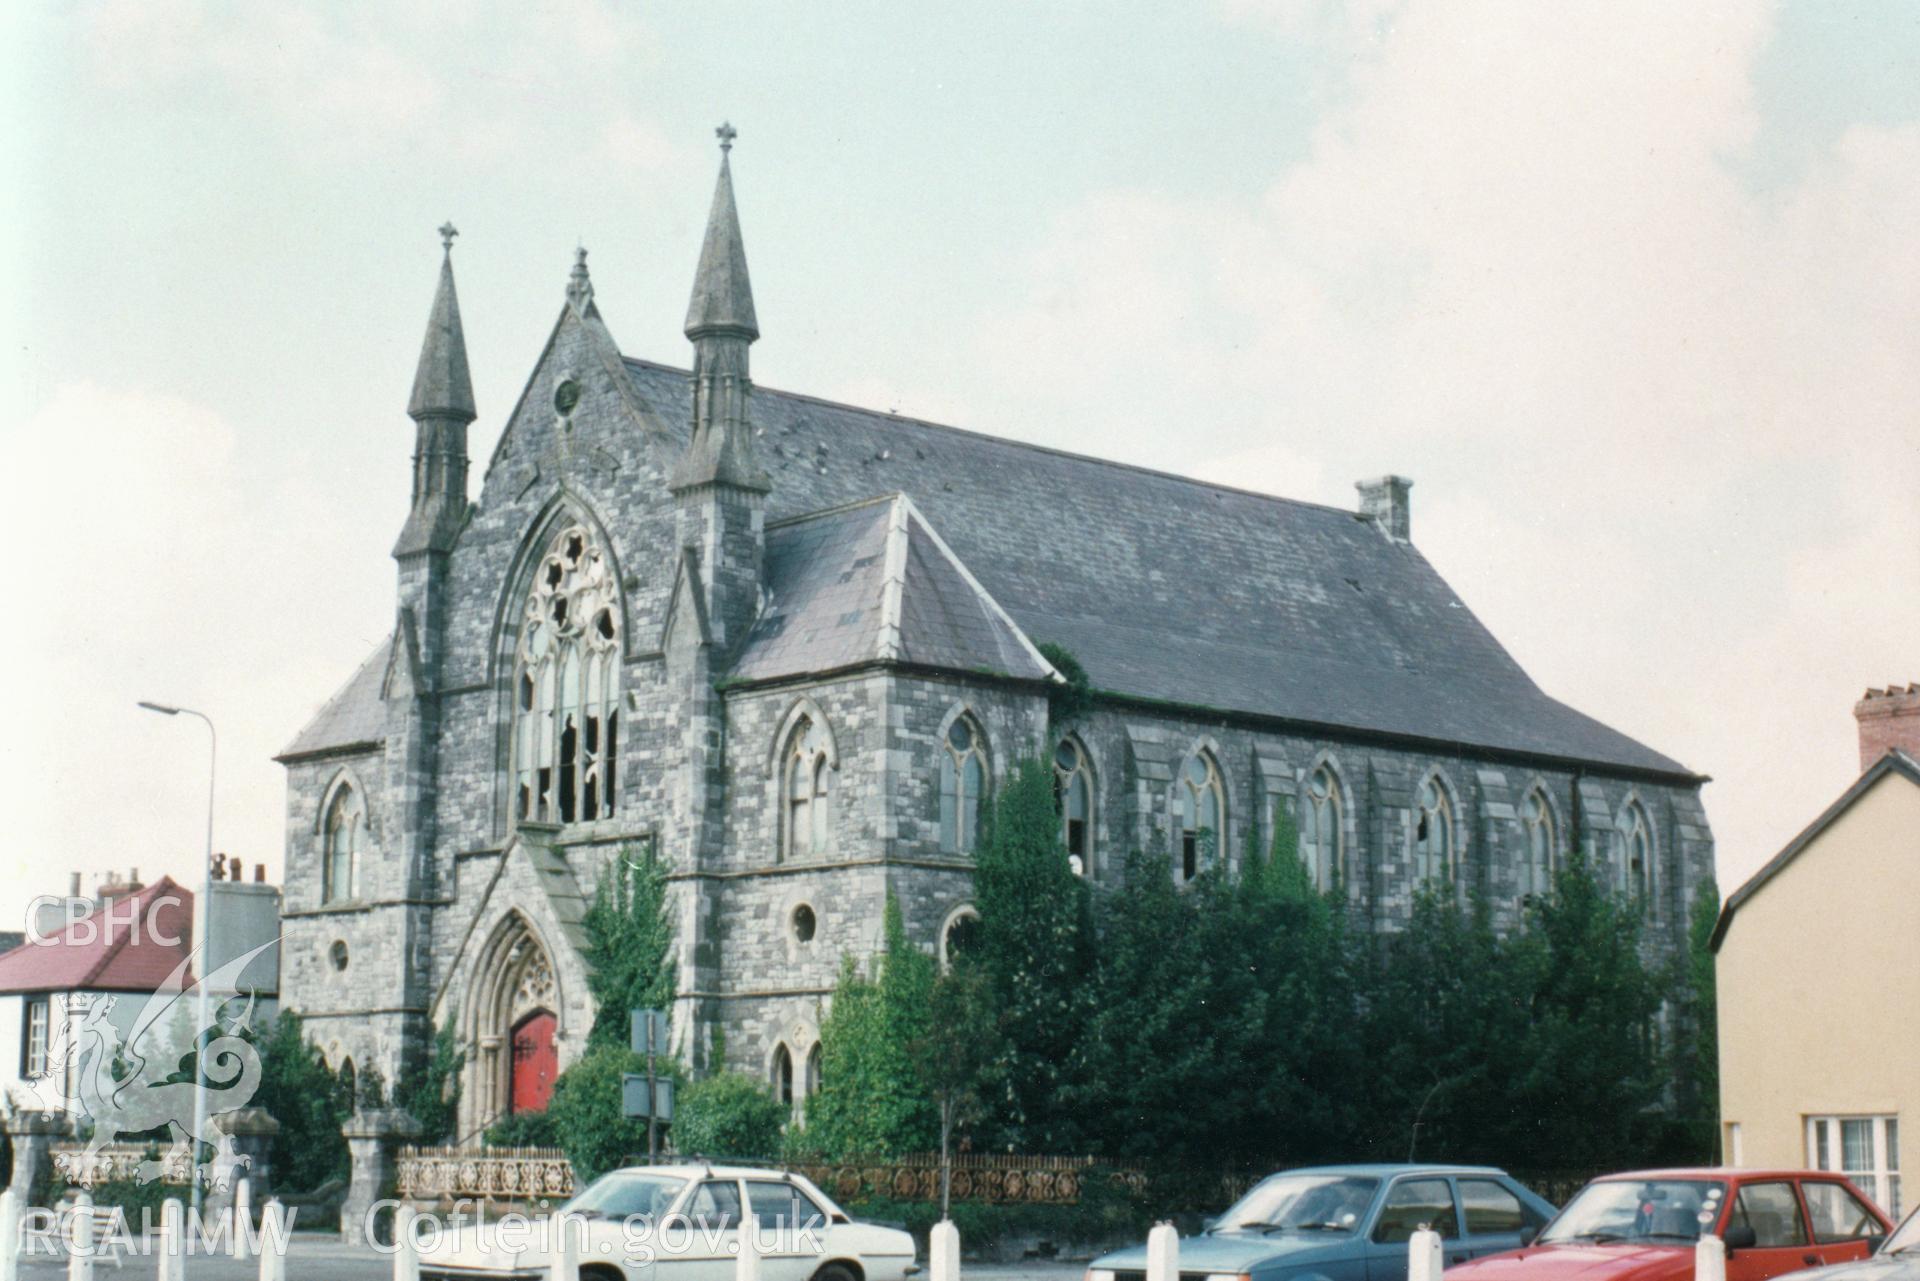 Digital copy of a colour photograph showing an exterior view of Albion Square Congregational Chapel, Pembroke Dock taken by Robert Scourfield, 1996.